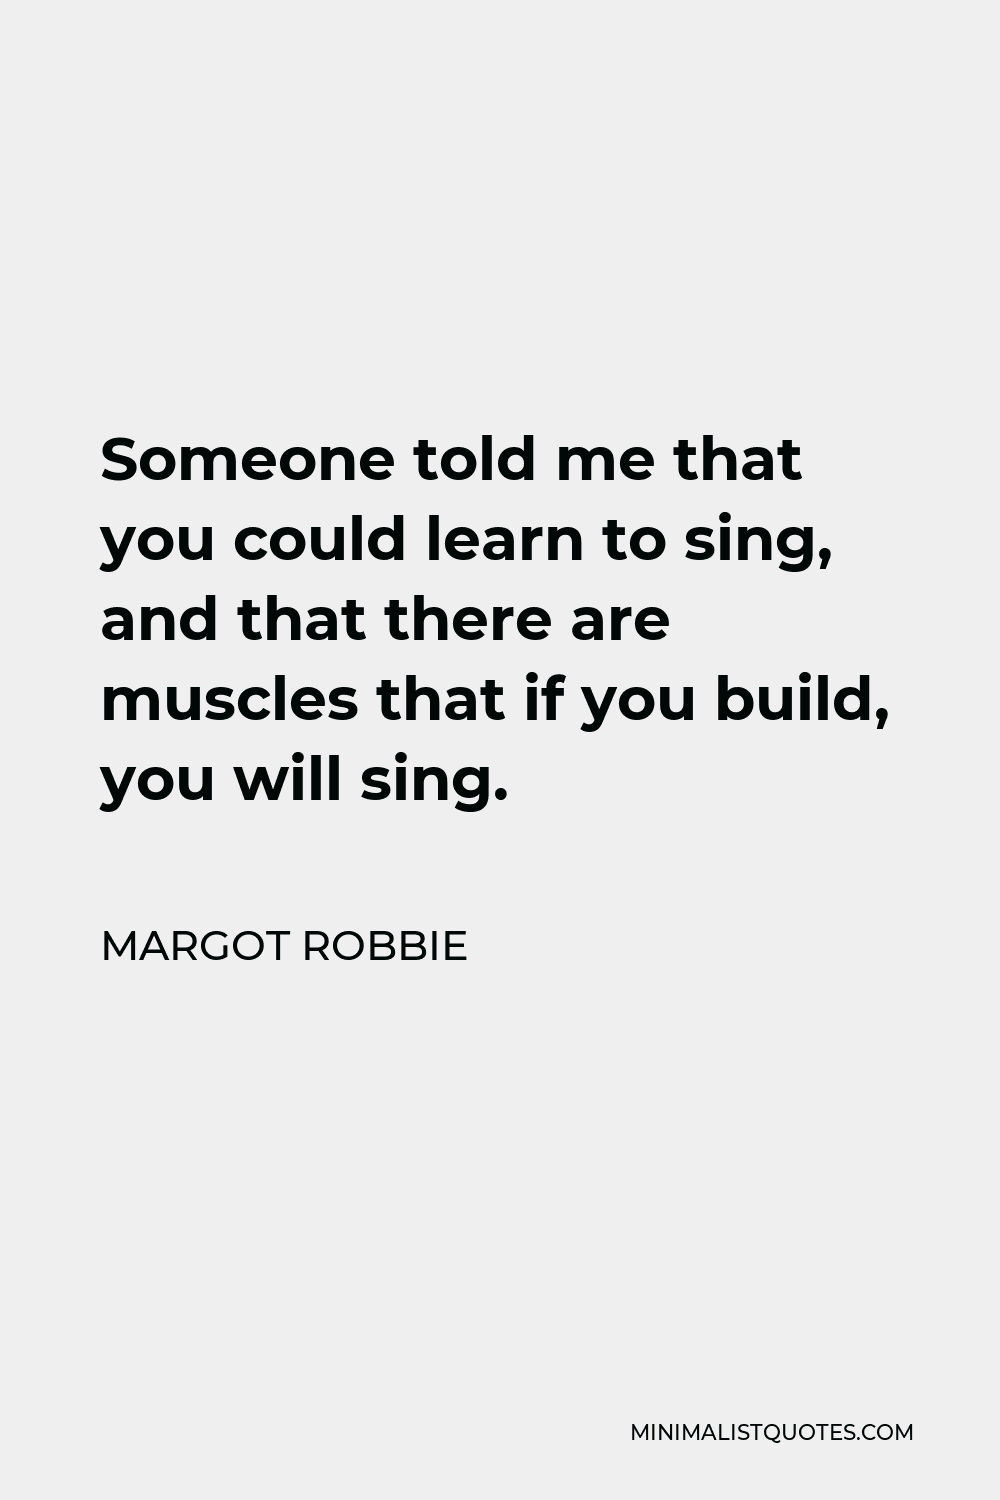 Margot Robbie Quote - Someone told me that you could learn to sing, and that there are muscles that if you build, you will sing.